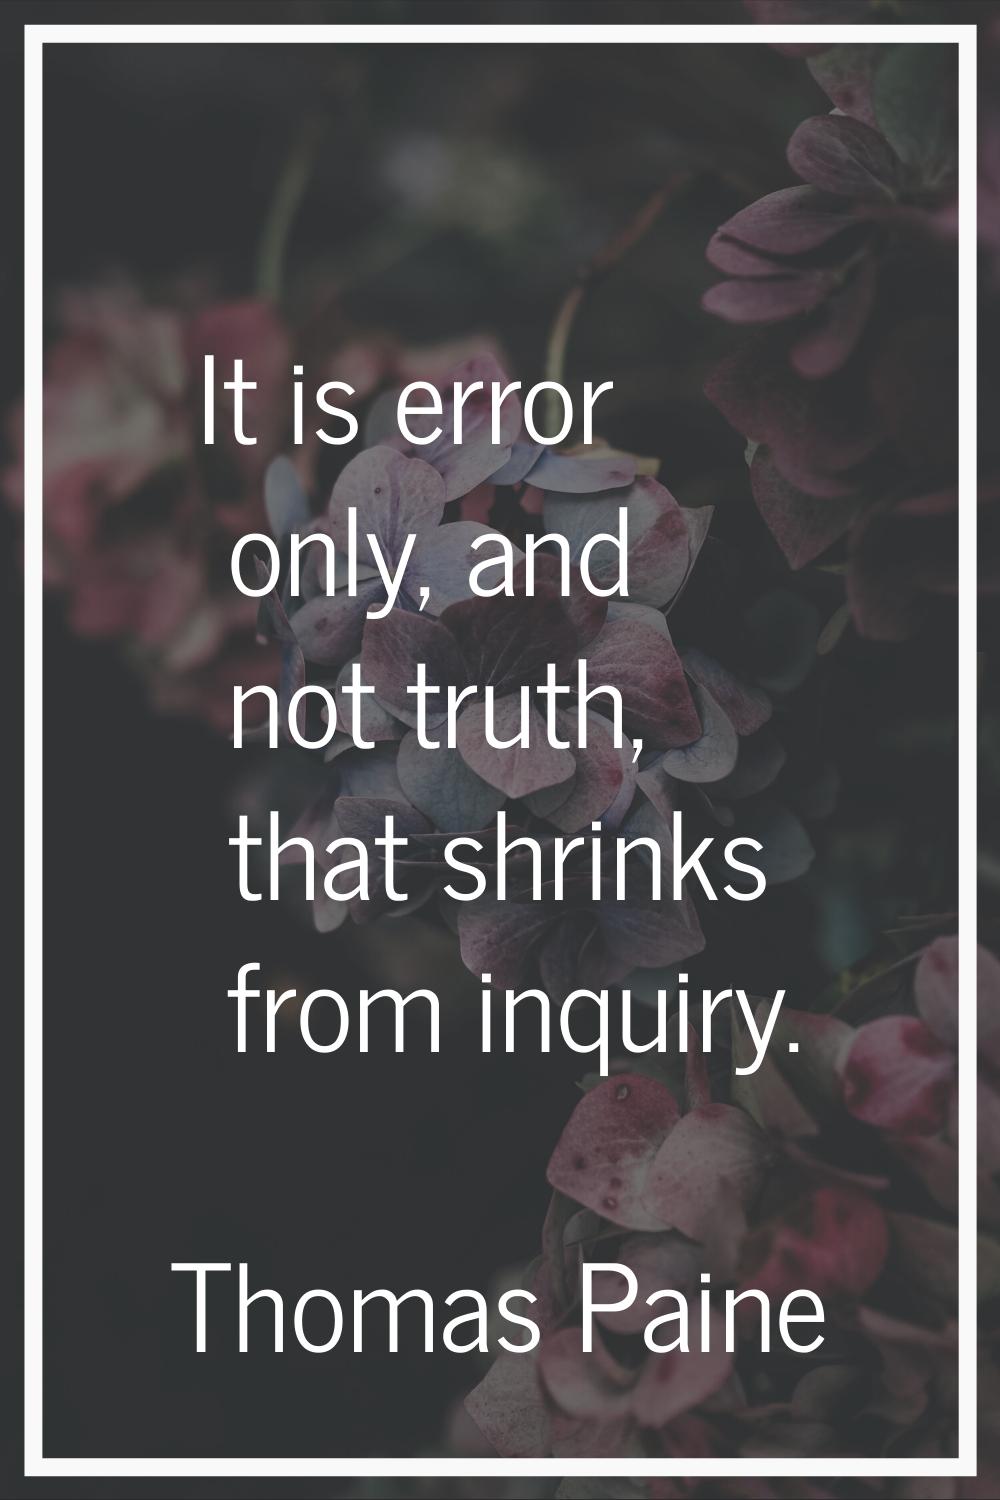 It is error only, and not truth, that shrinks from inquiry.